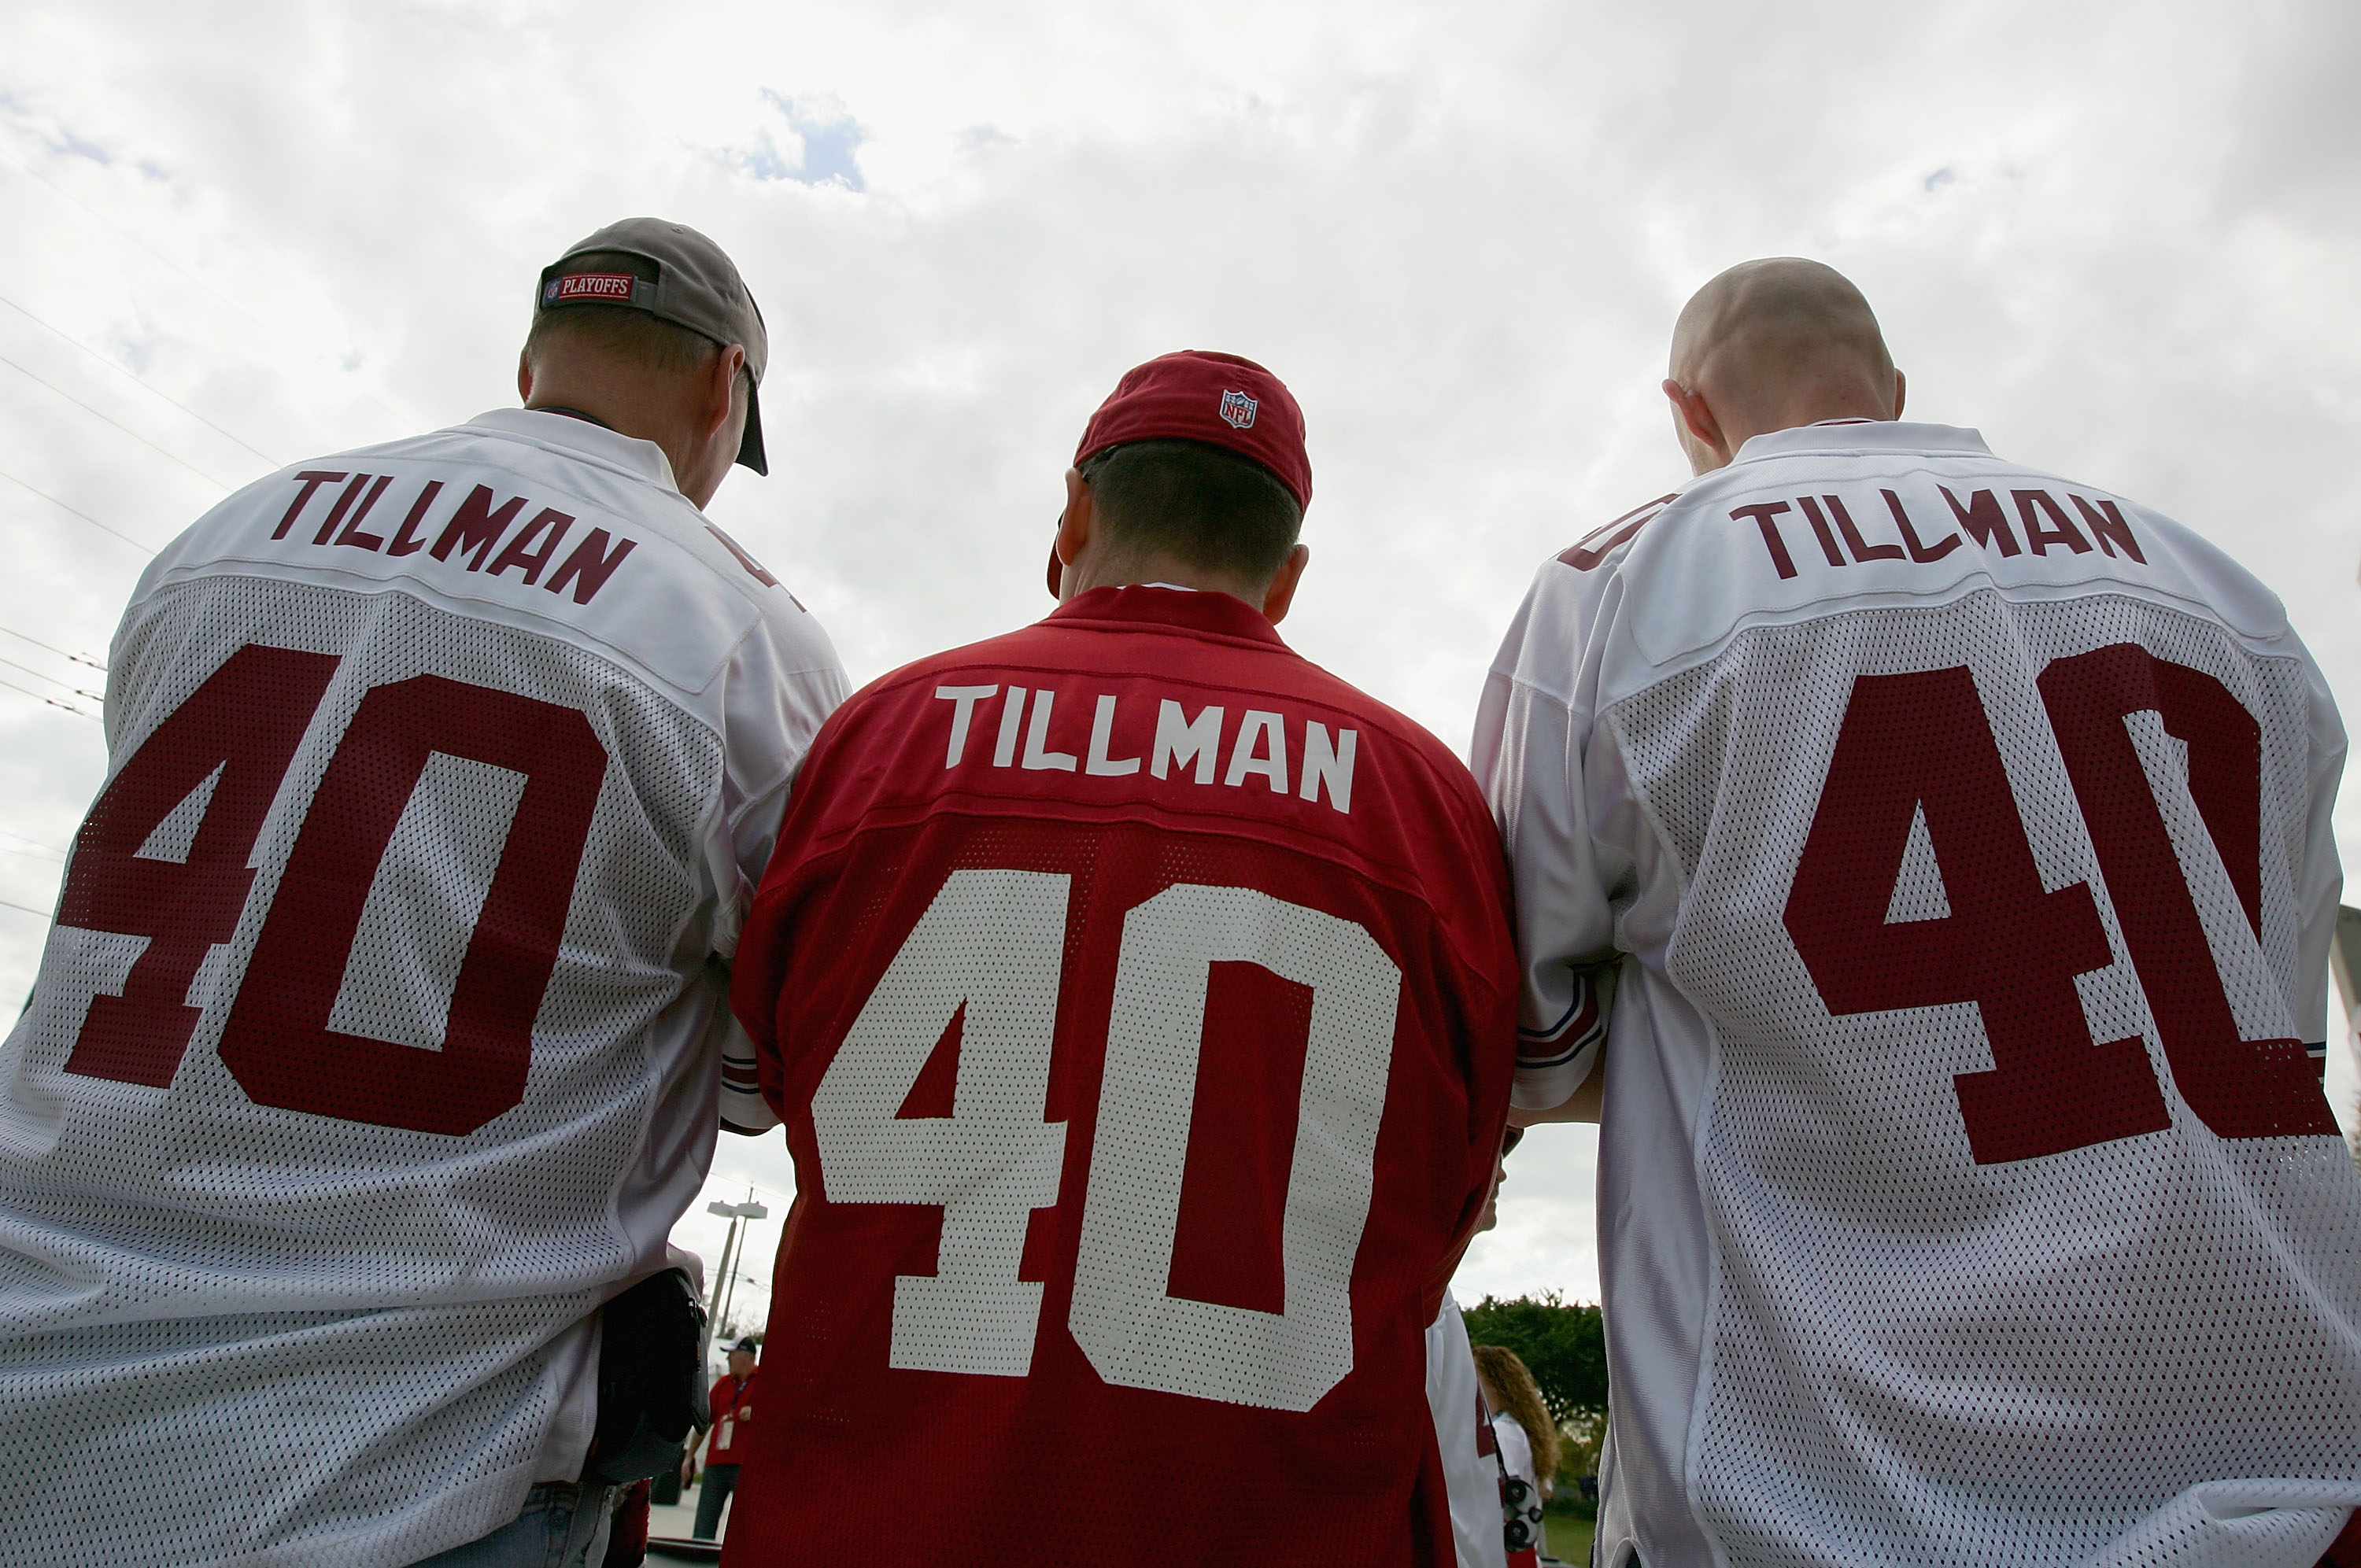 TAMPA, FL - FEBRUARY 01:  Arizona Cardinals fans wearing Pat Tillman jerseys (L-R) Dave Schile, Bruce Goff and Dave Schile Jr. look on outside of Raymond James Stadium before Super Bowl XLIII on February 1, 2009 at Raymond James Stadium in Tampa, Florida.